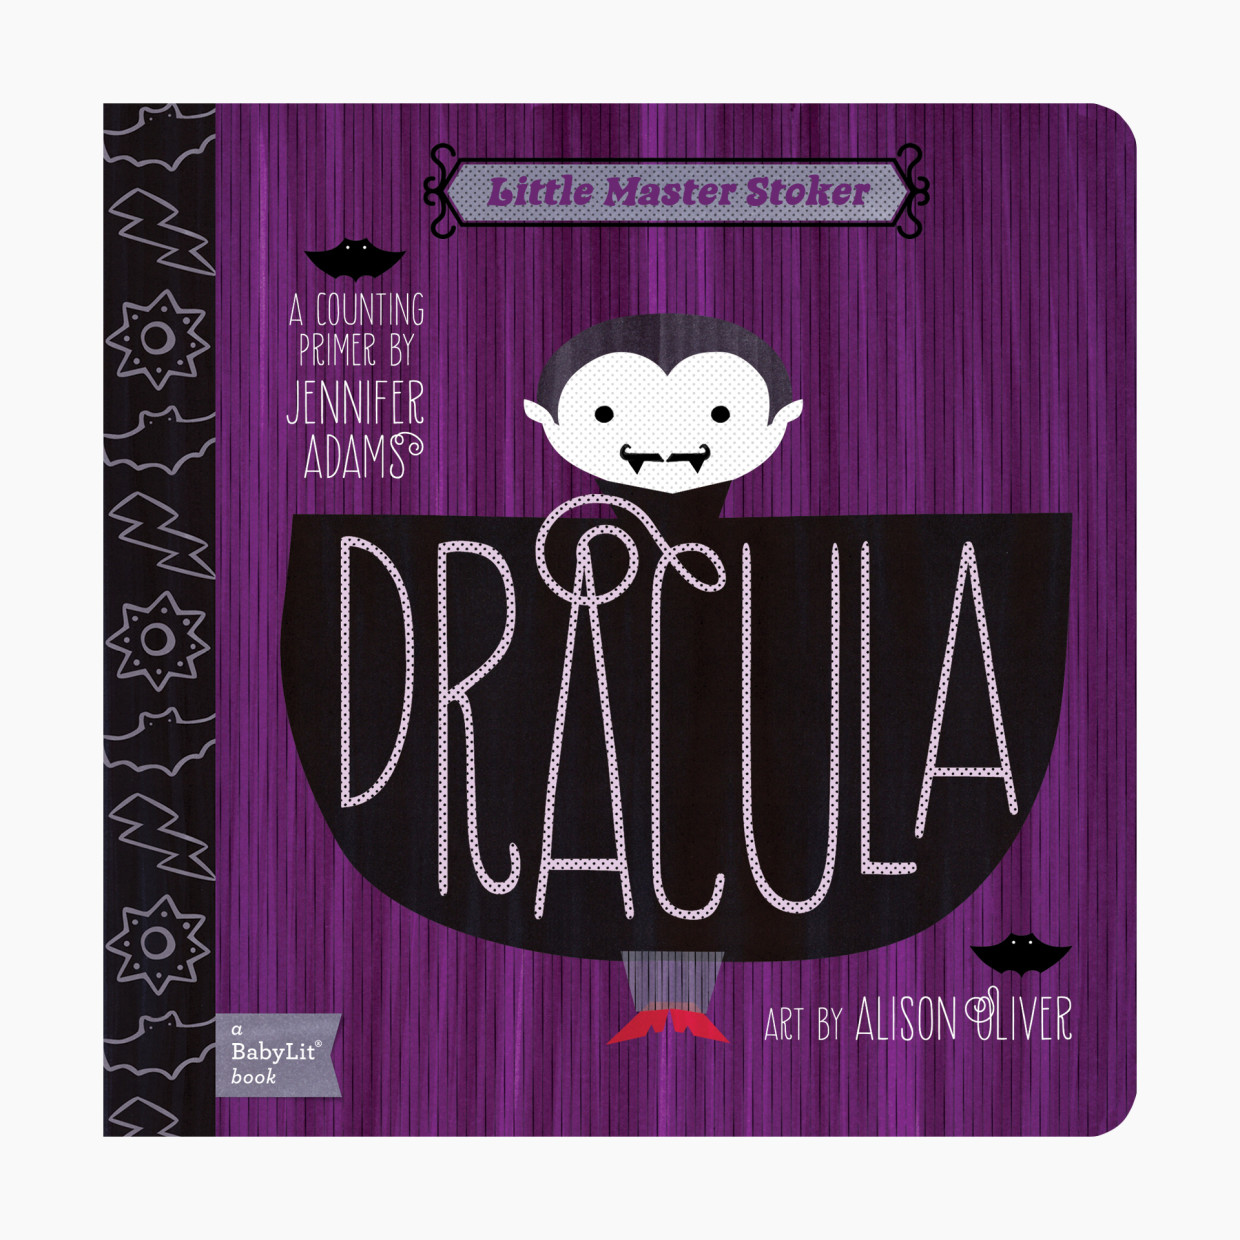 Dracula: A BabyLit Counting Primer.